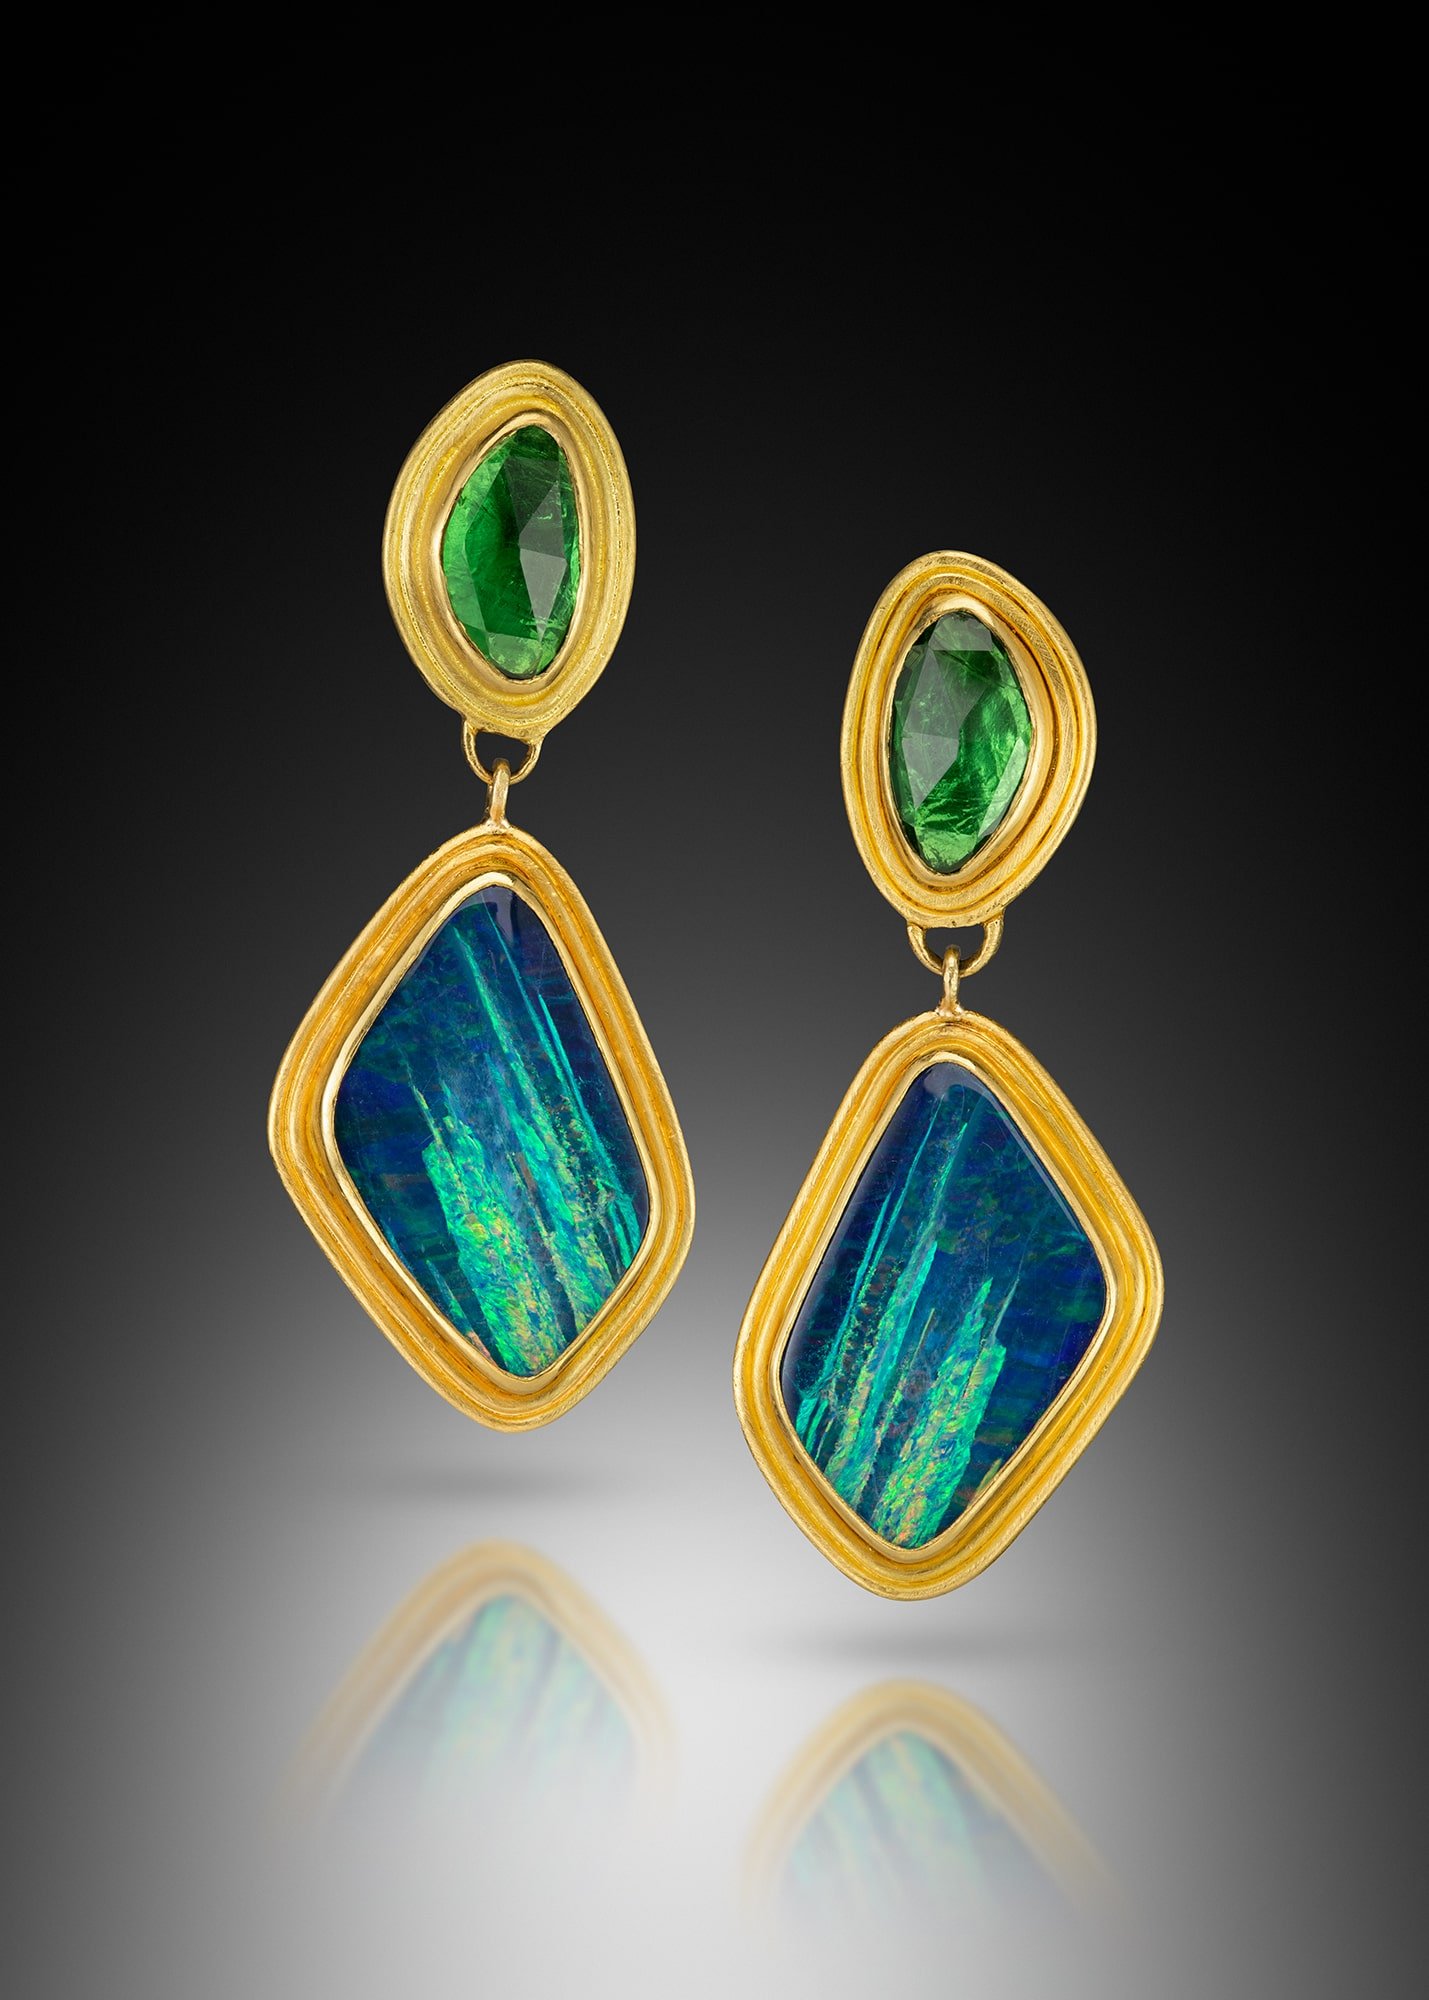 Opal and Tsavorite Earrings.   These long earrings are hand fabricated, and fused in 22k gold.  They are set with Australian opals and rose cut tsavorites.